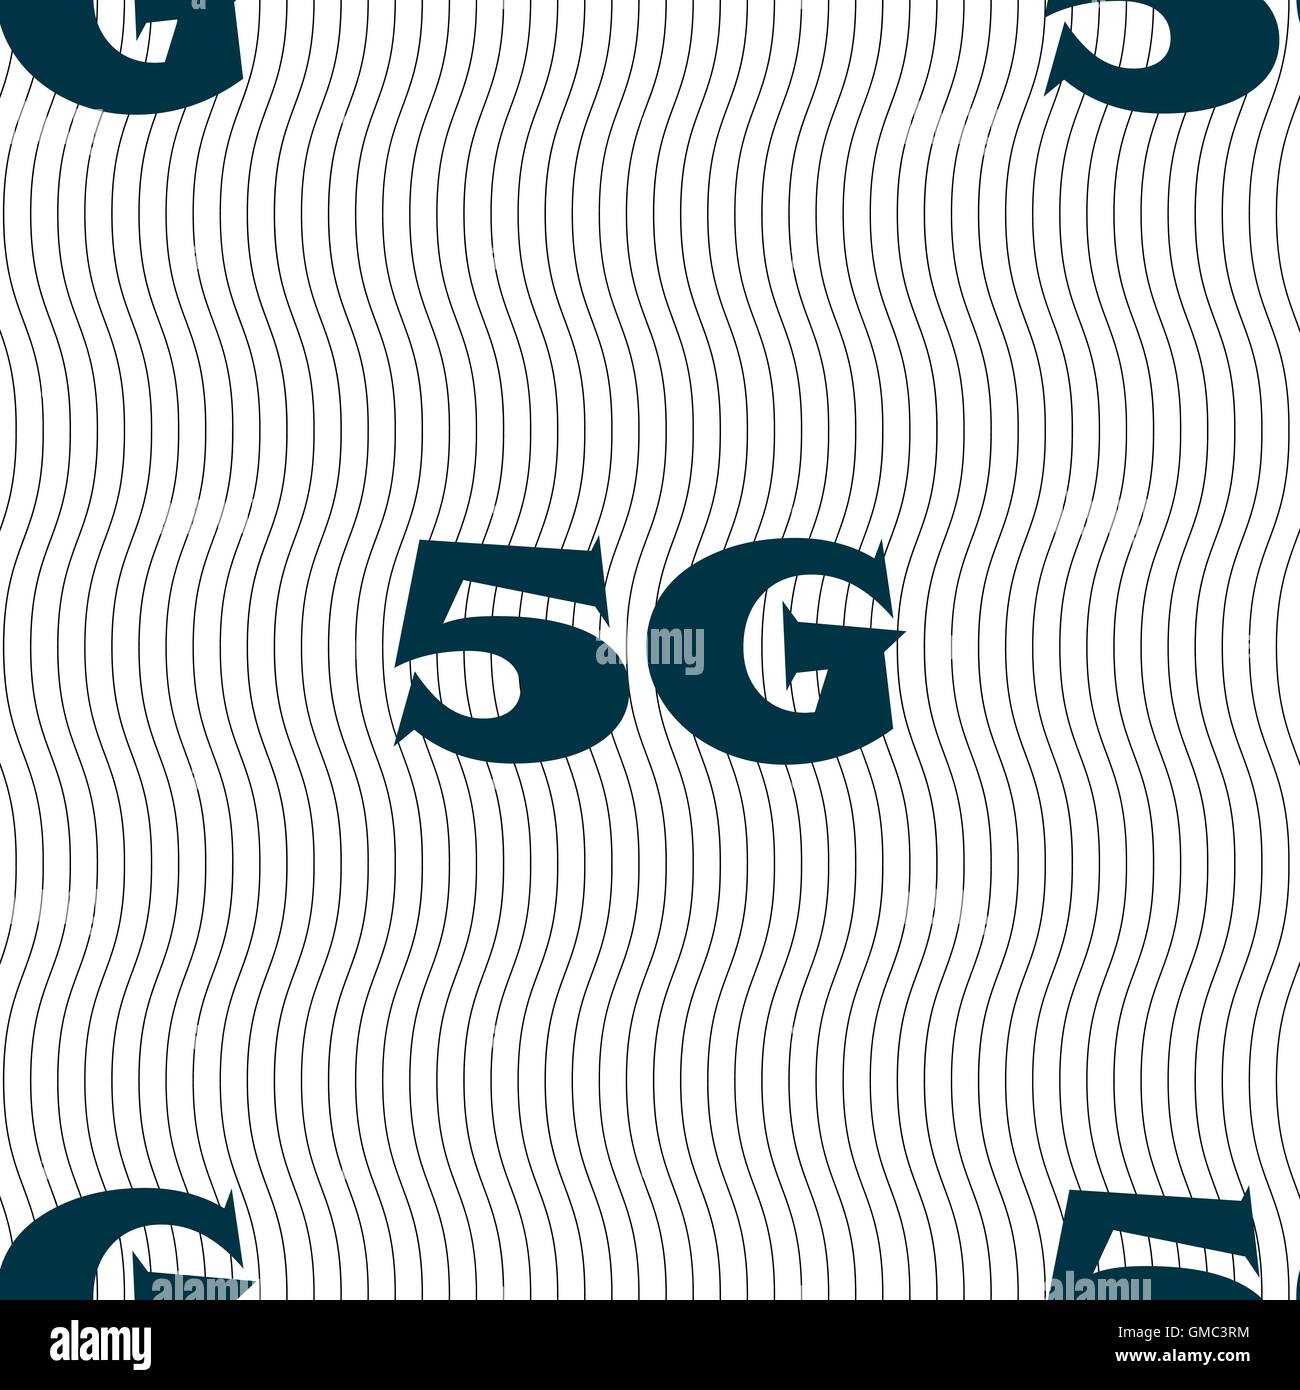 5G sign icon. Mobile telecommunications technology symbol. Seamless pattern with geometric texture. Vector Stock Vector